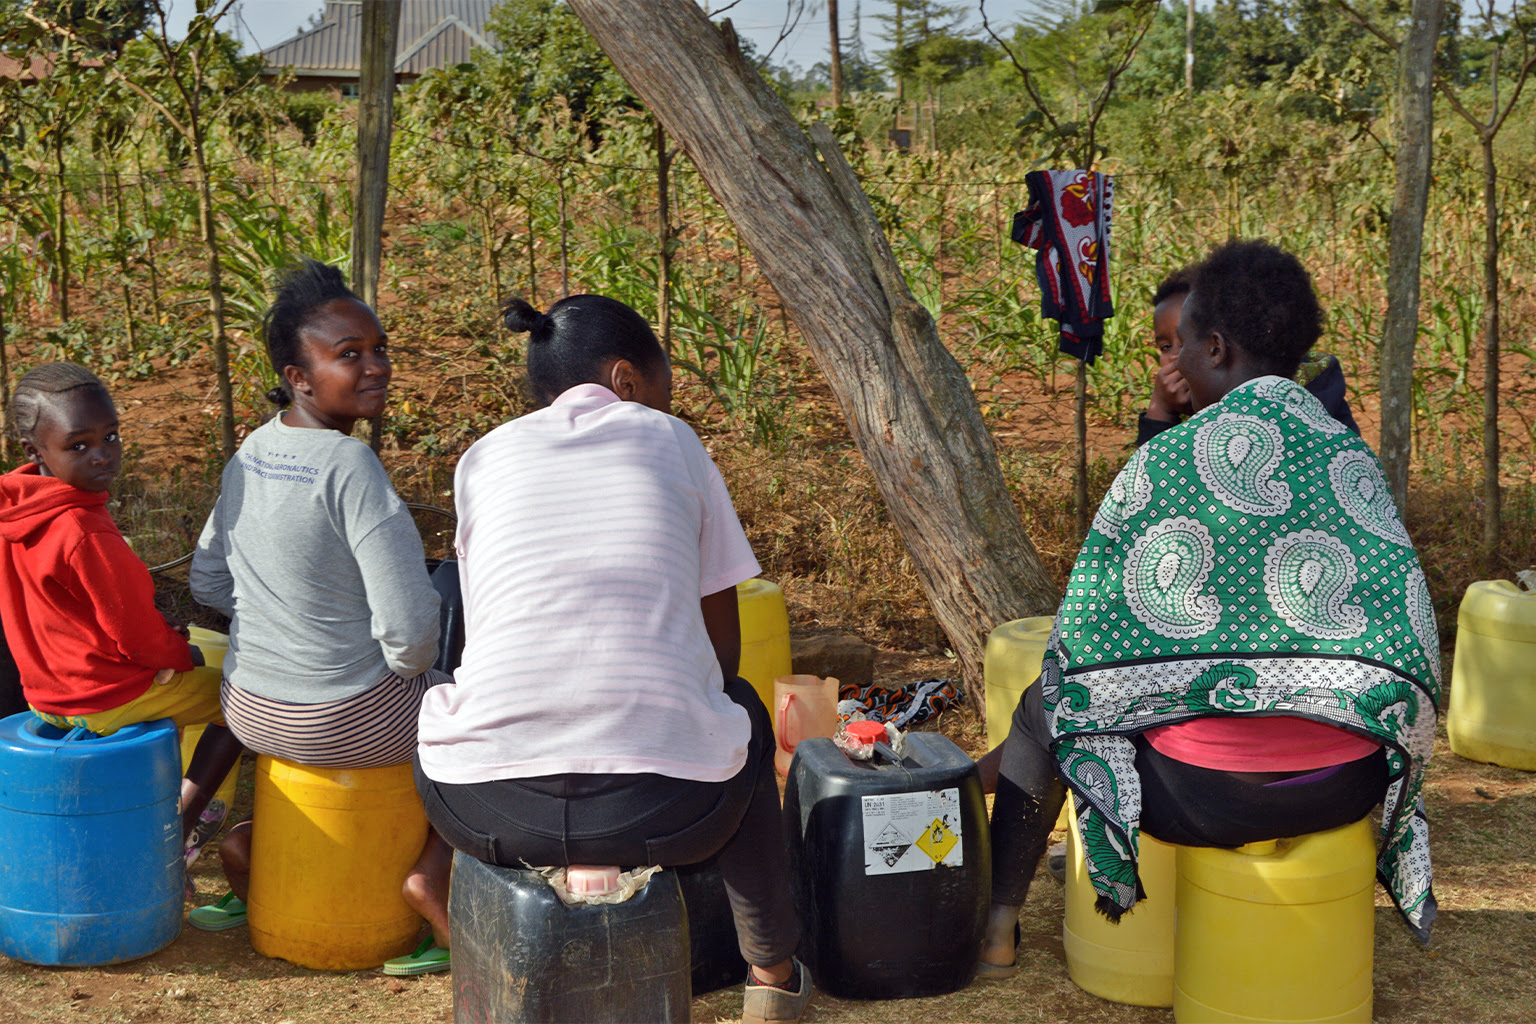 Every woman at the water point had at least four containers.